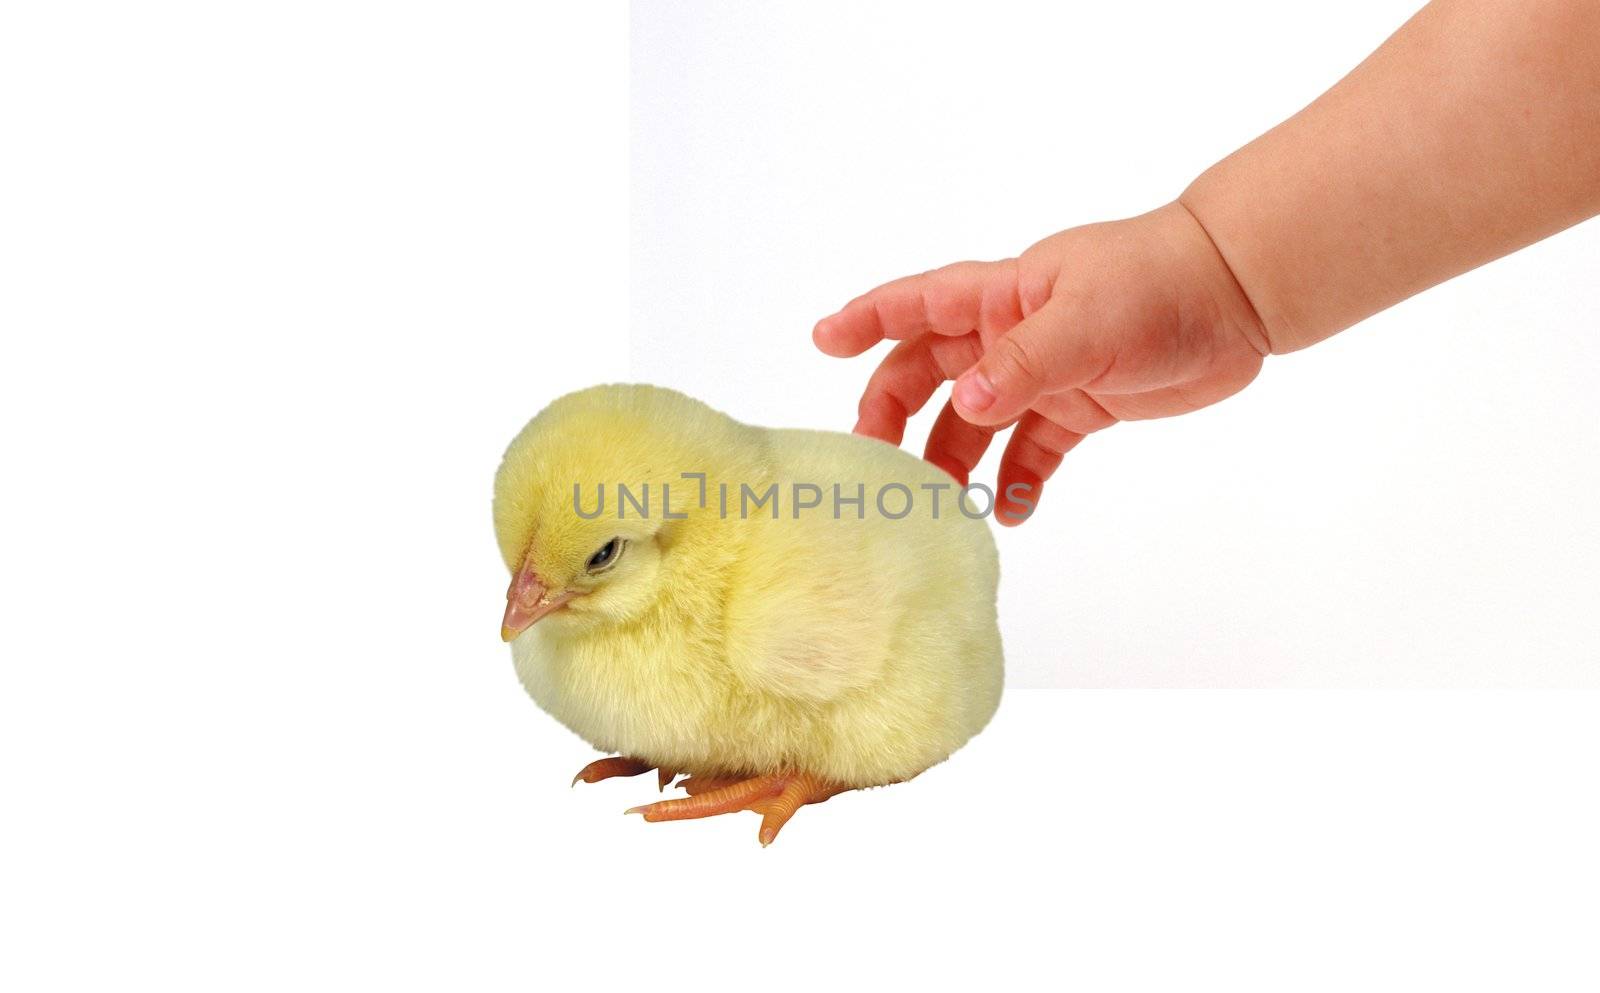 A chicken with a small babies hand